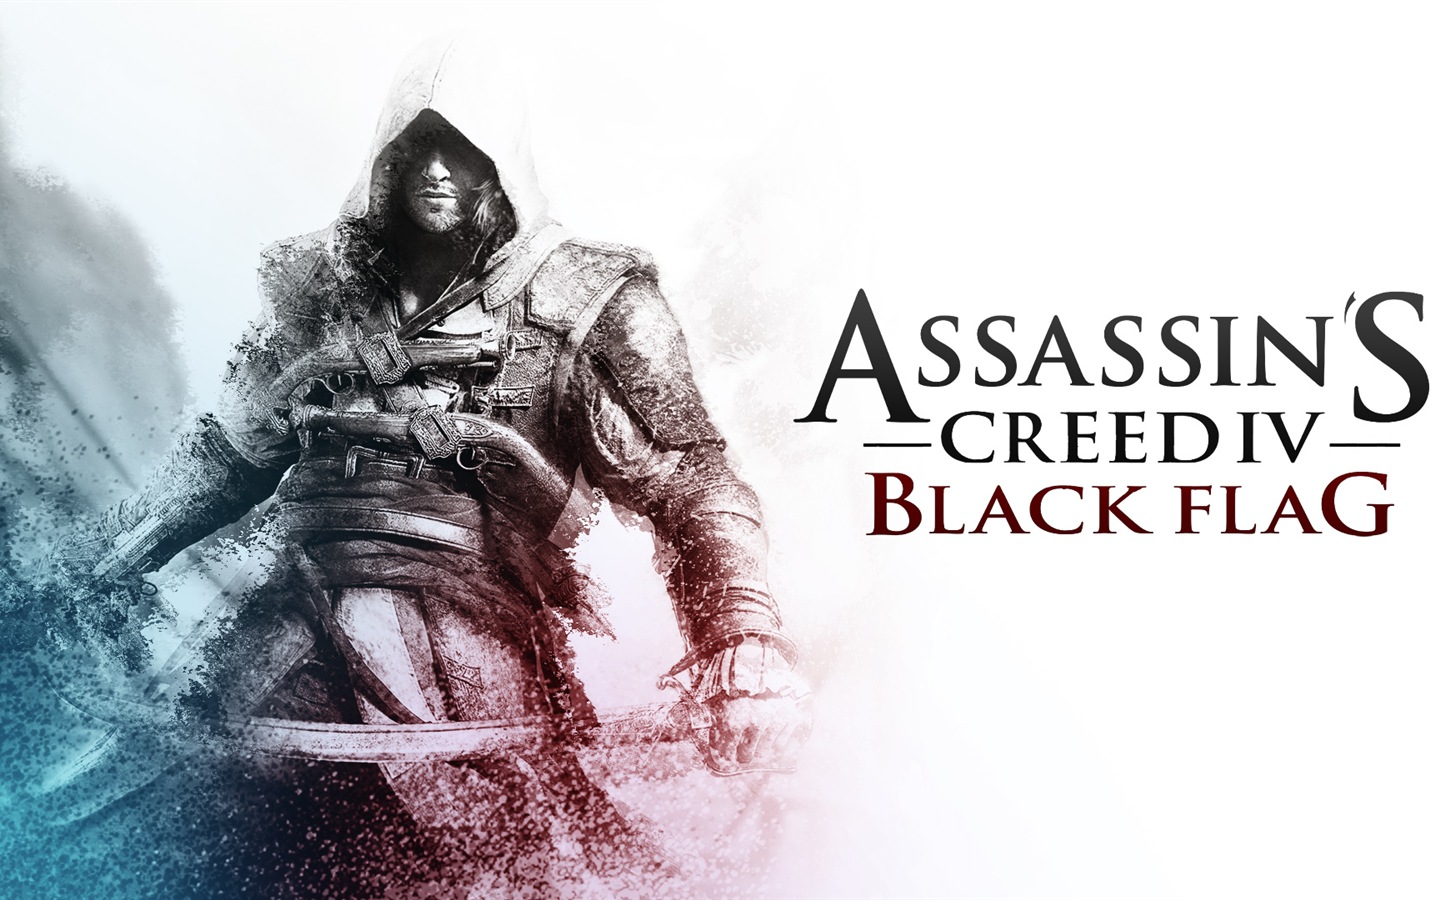 Creed IV Assassin: Black Flag HD wallpapers #16 - 1440x900